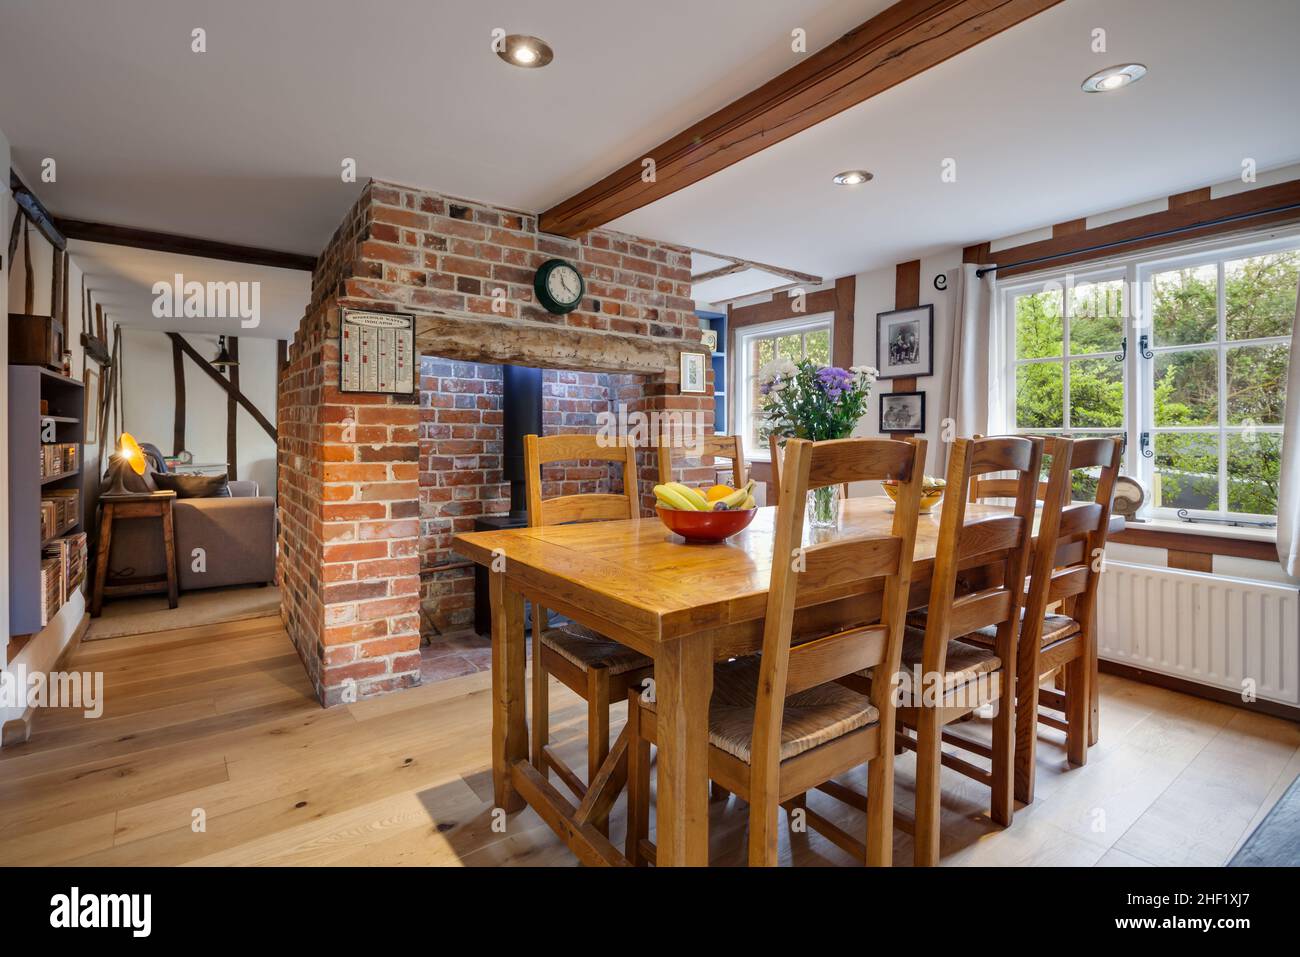 Clare, Suffolk - 27 April 2018: Beautiful, charming, small traditional cottage dining room with exposed brick inglenook fireplace and wooden floor Stock Photo